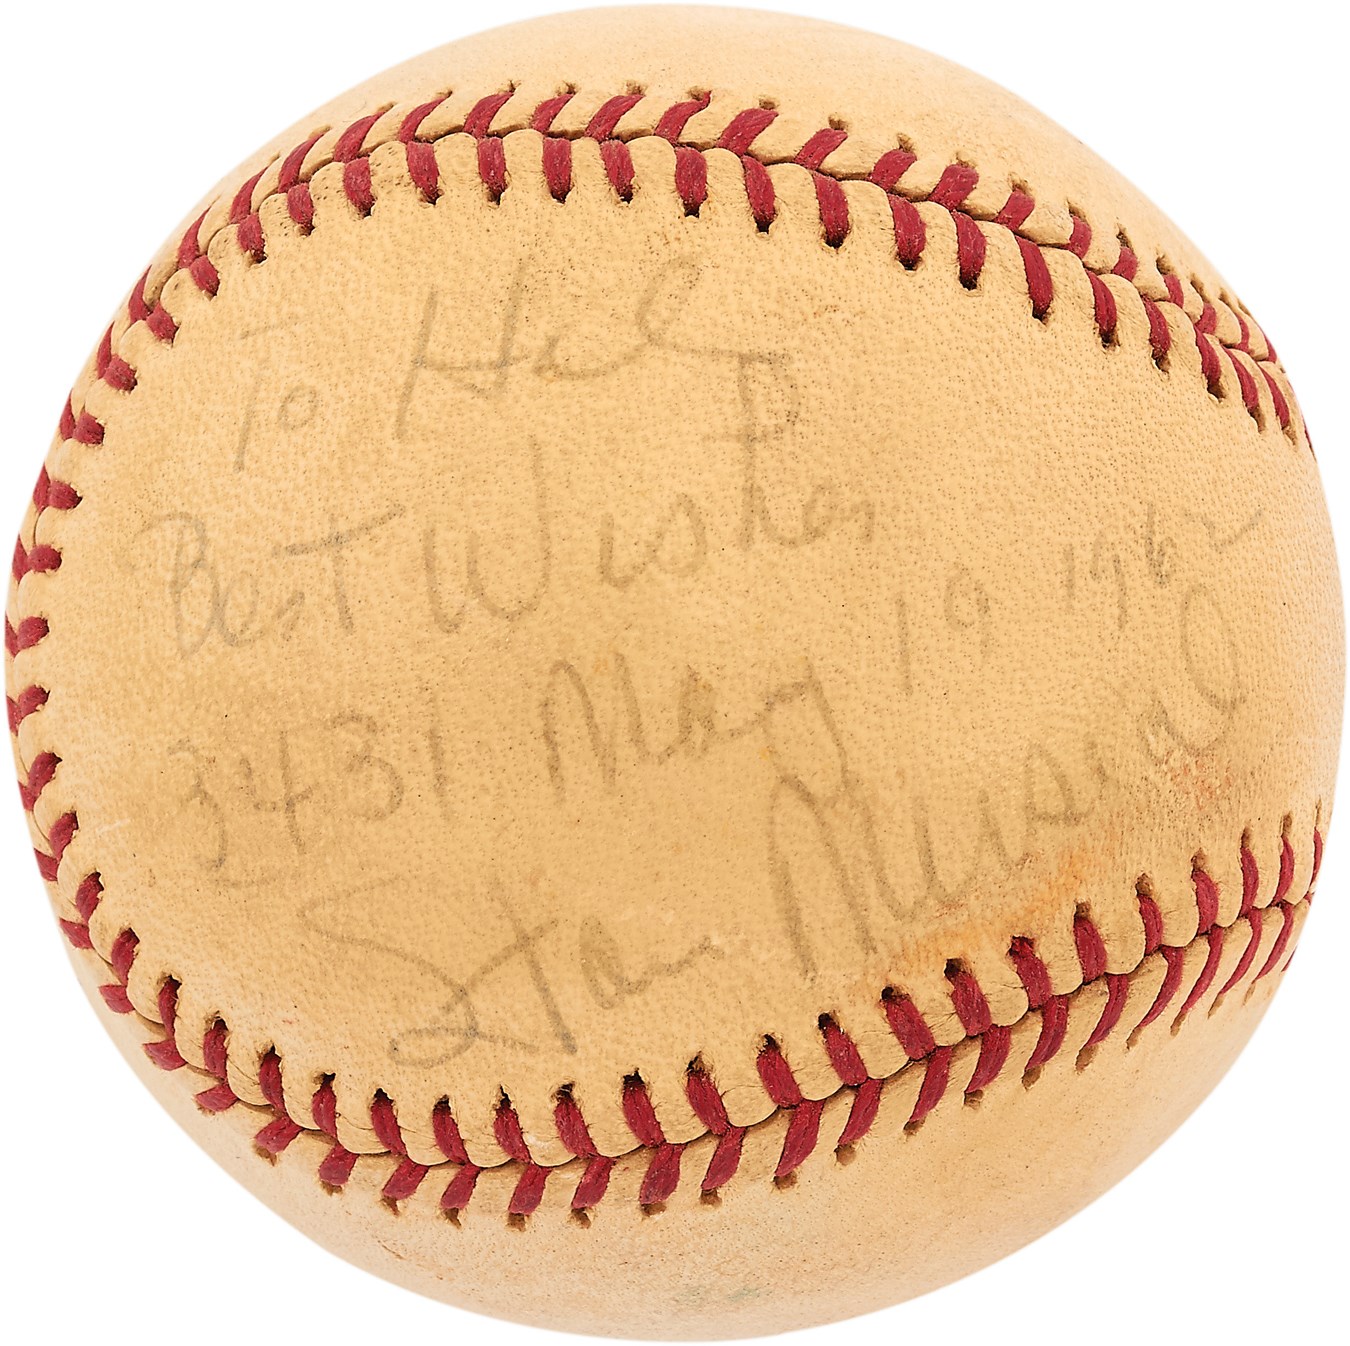 St. Louis Cardinals - 1962 Stan Musial Hit #3431 Baseball - From Teammate Hal Smith (PSA)